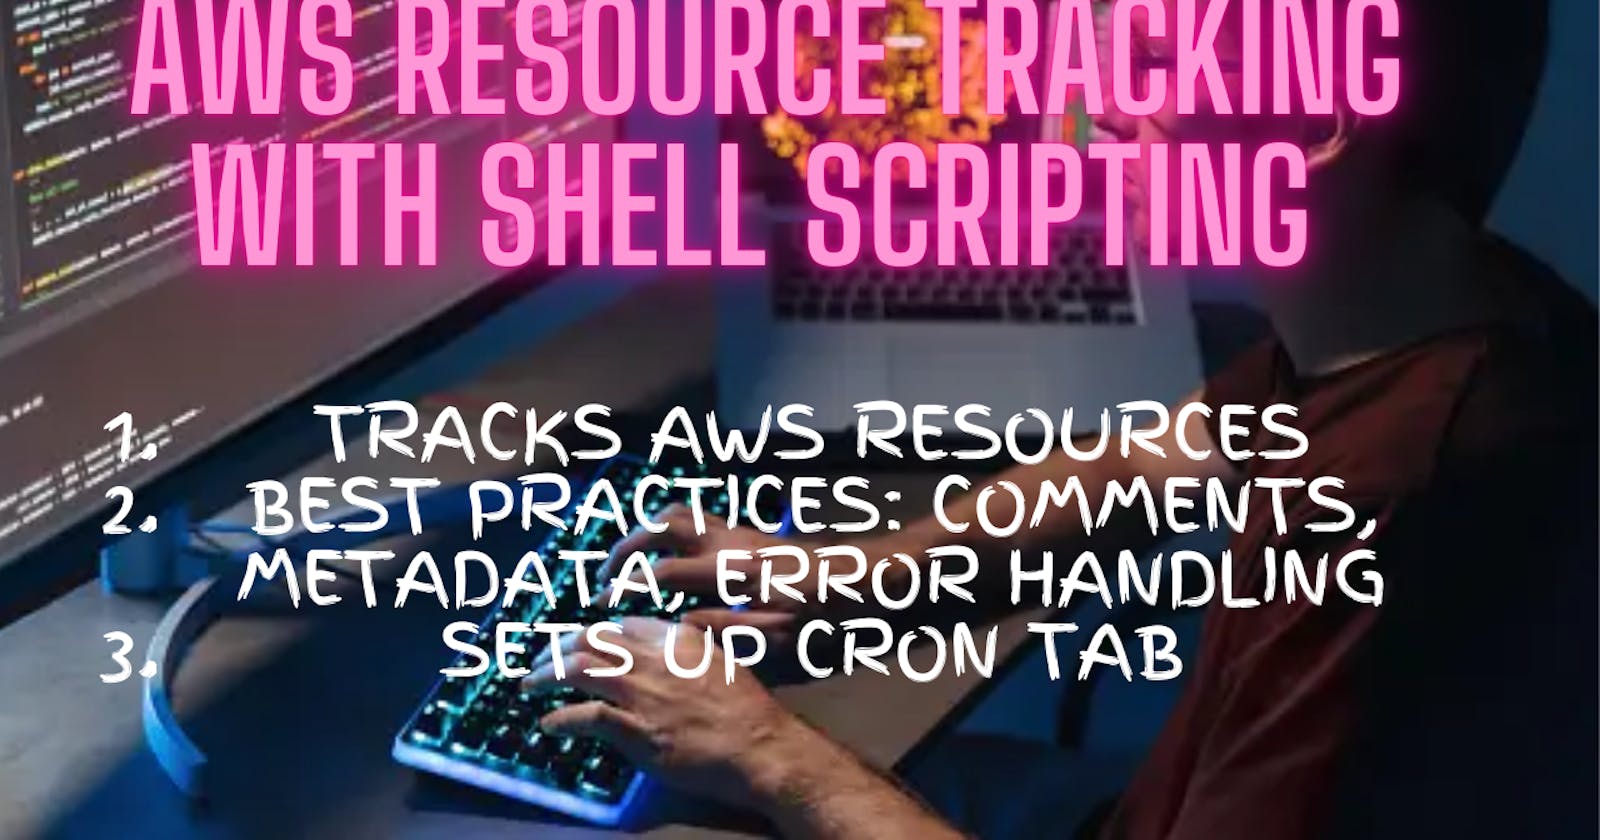 AWS Resource Tracking with Shell Scripting: Part-1